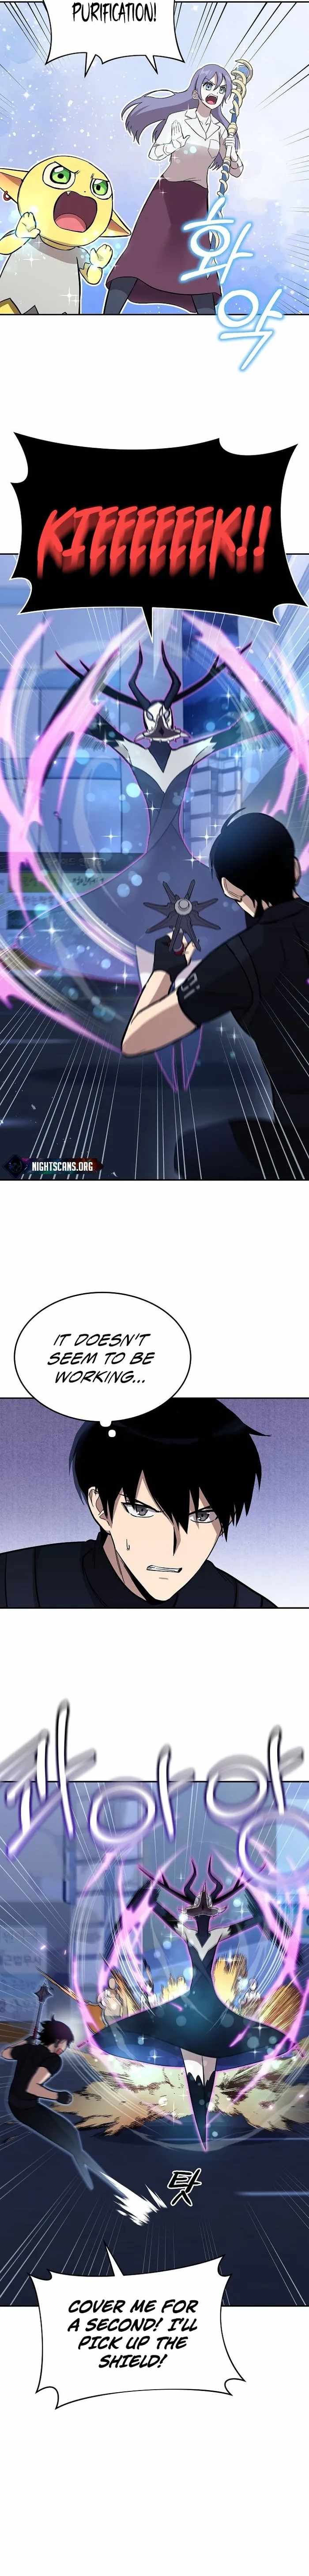 Climbing the Tower that Even the Regressor Couldn’t Chapter 16-eng-li - Page 14